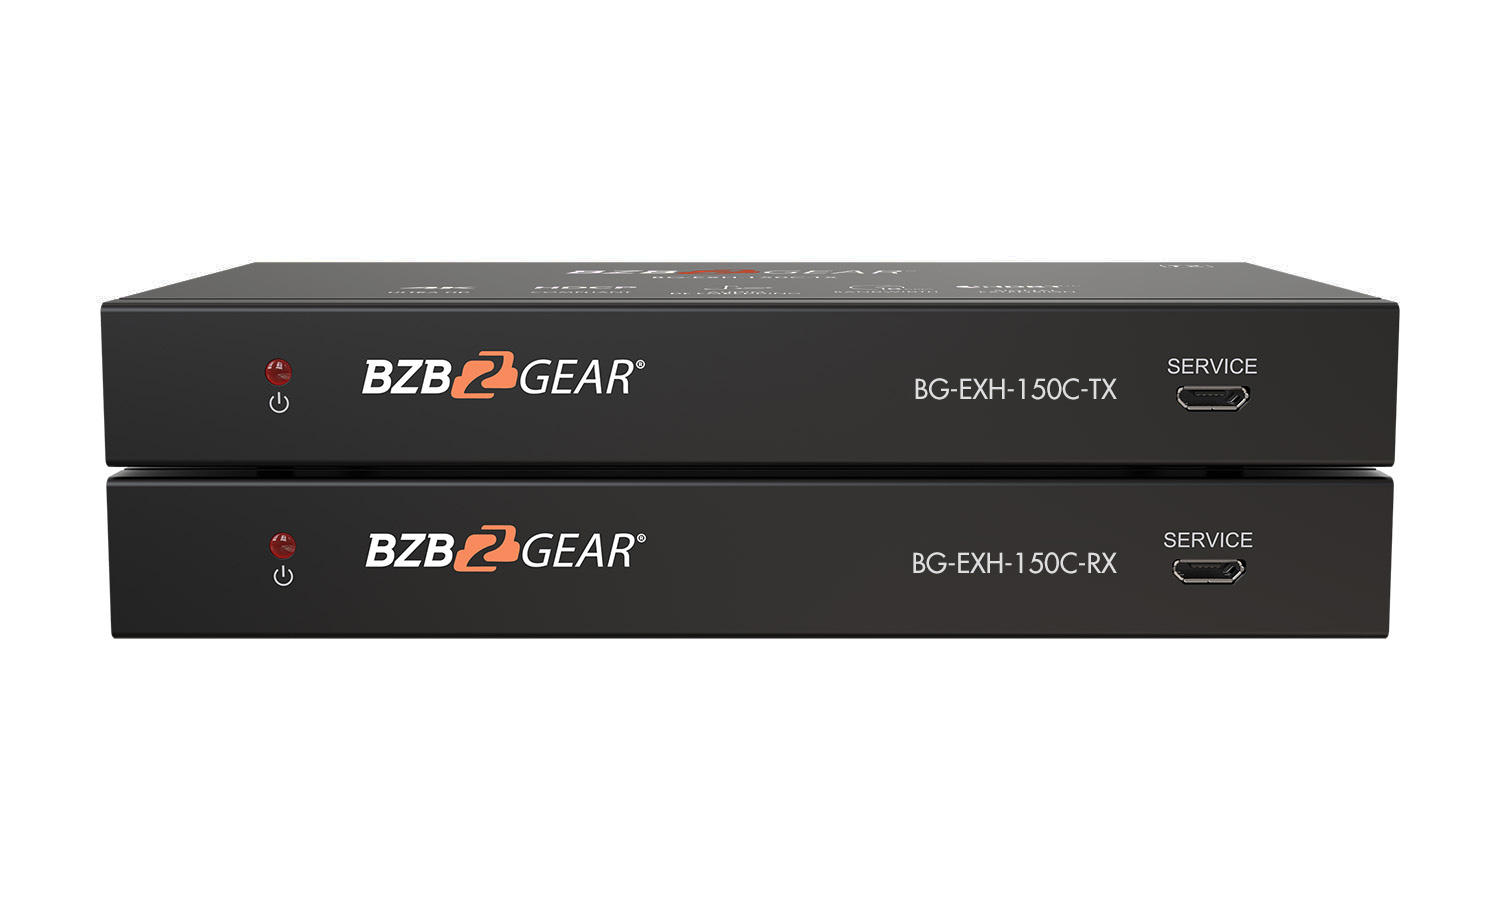 BG-EXH-150C 4K UHD HDMI HDBaseT Long Range Extender with Bi-directional IR RS-232 and CEC up to 490ft by BZBGEAR